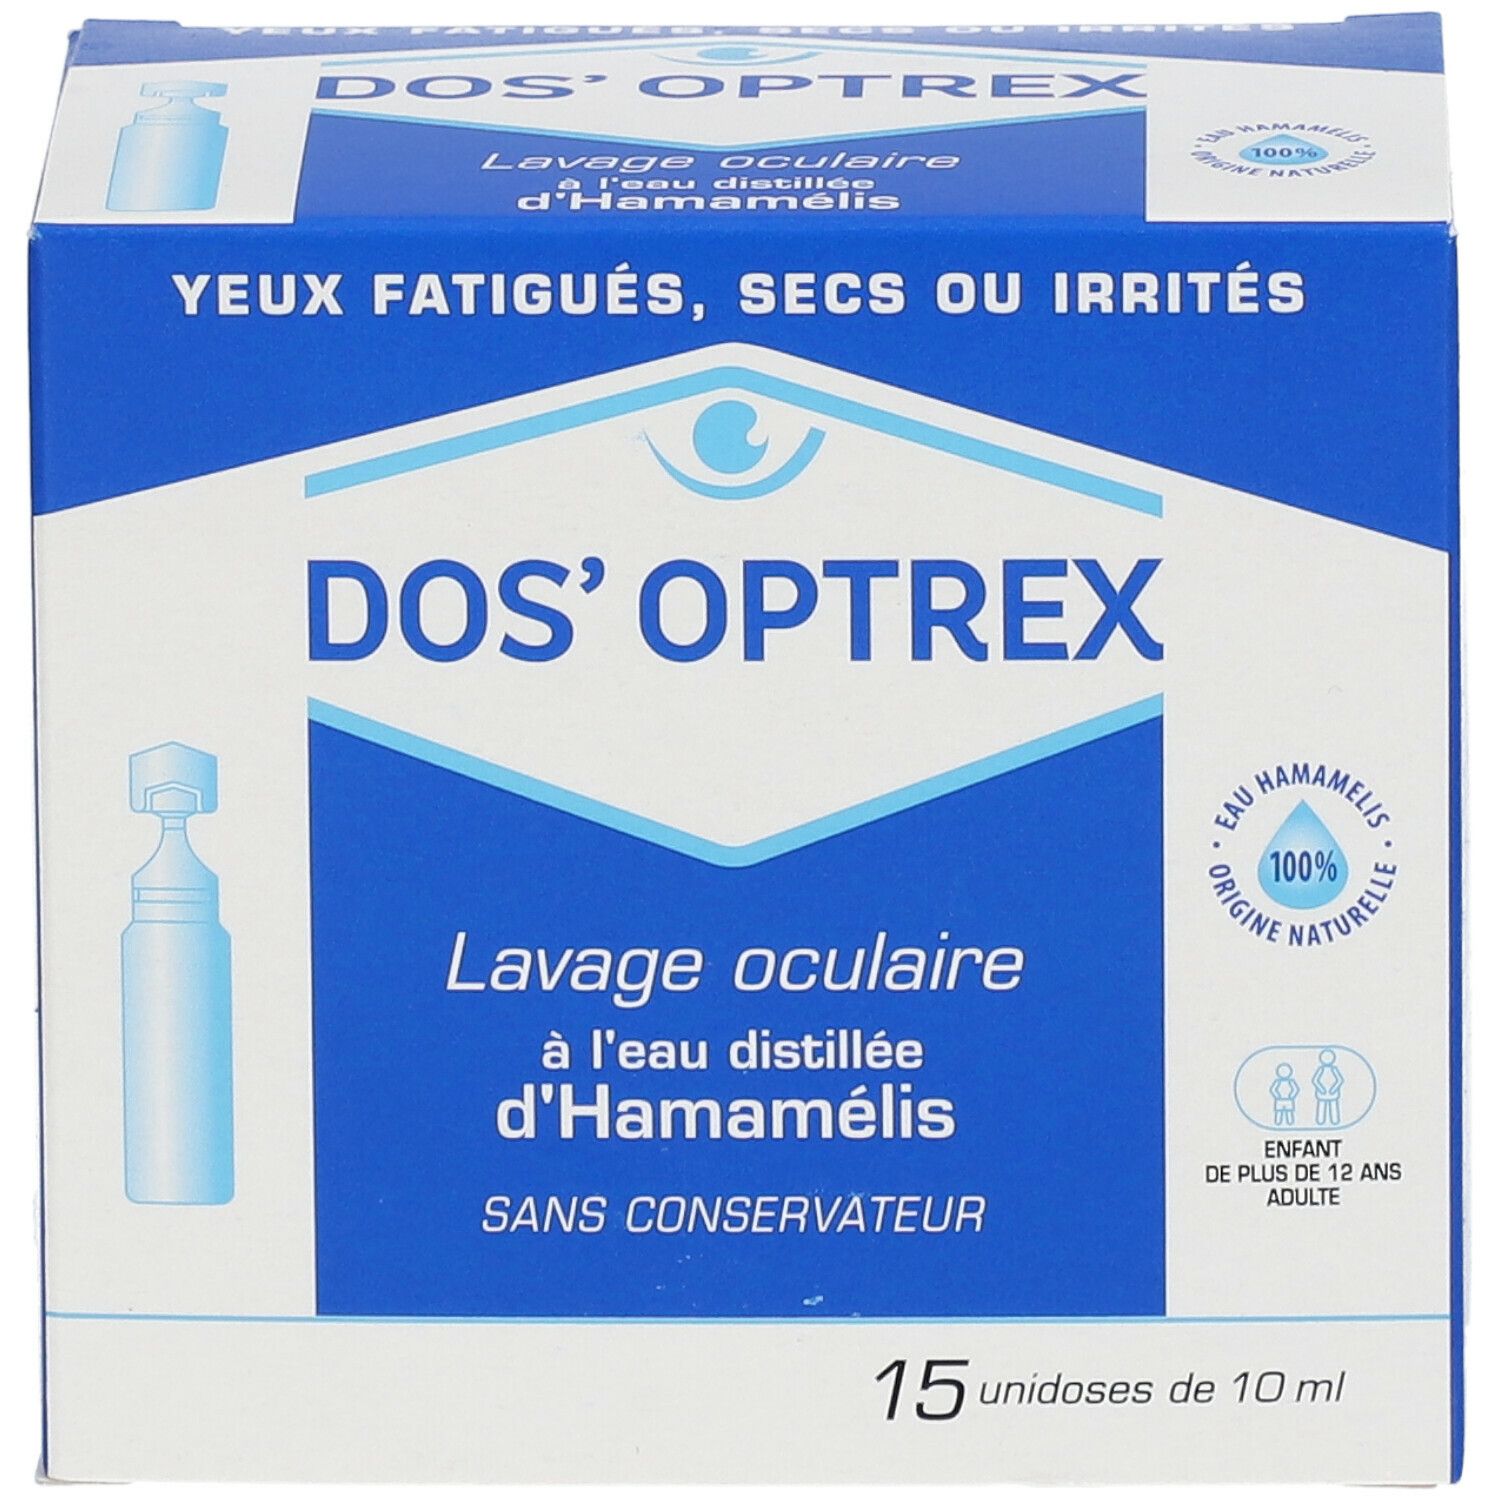 Dos'Optrex Lavage oculaire